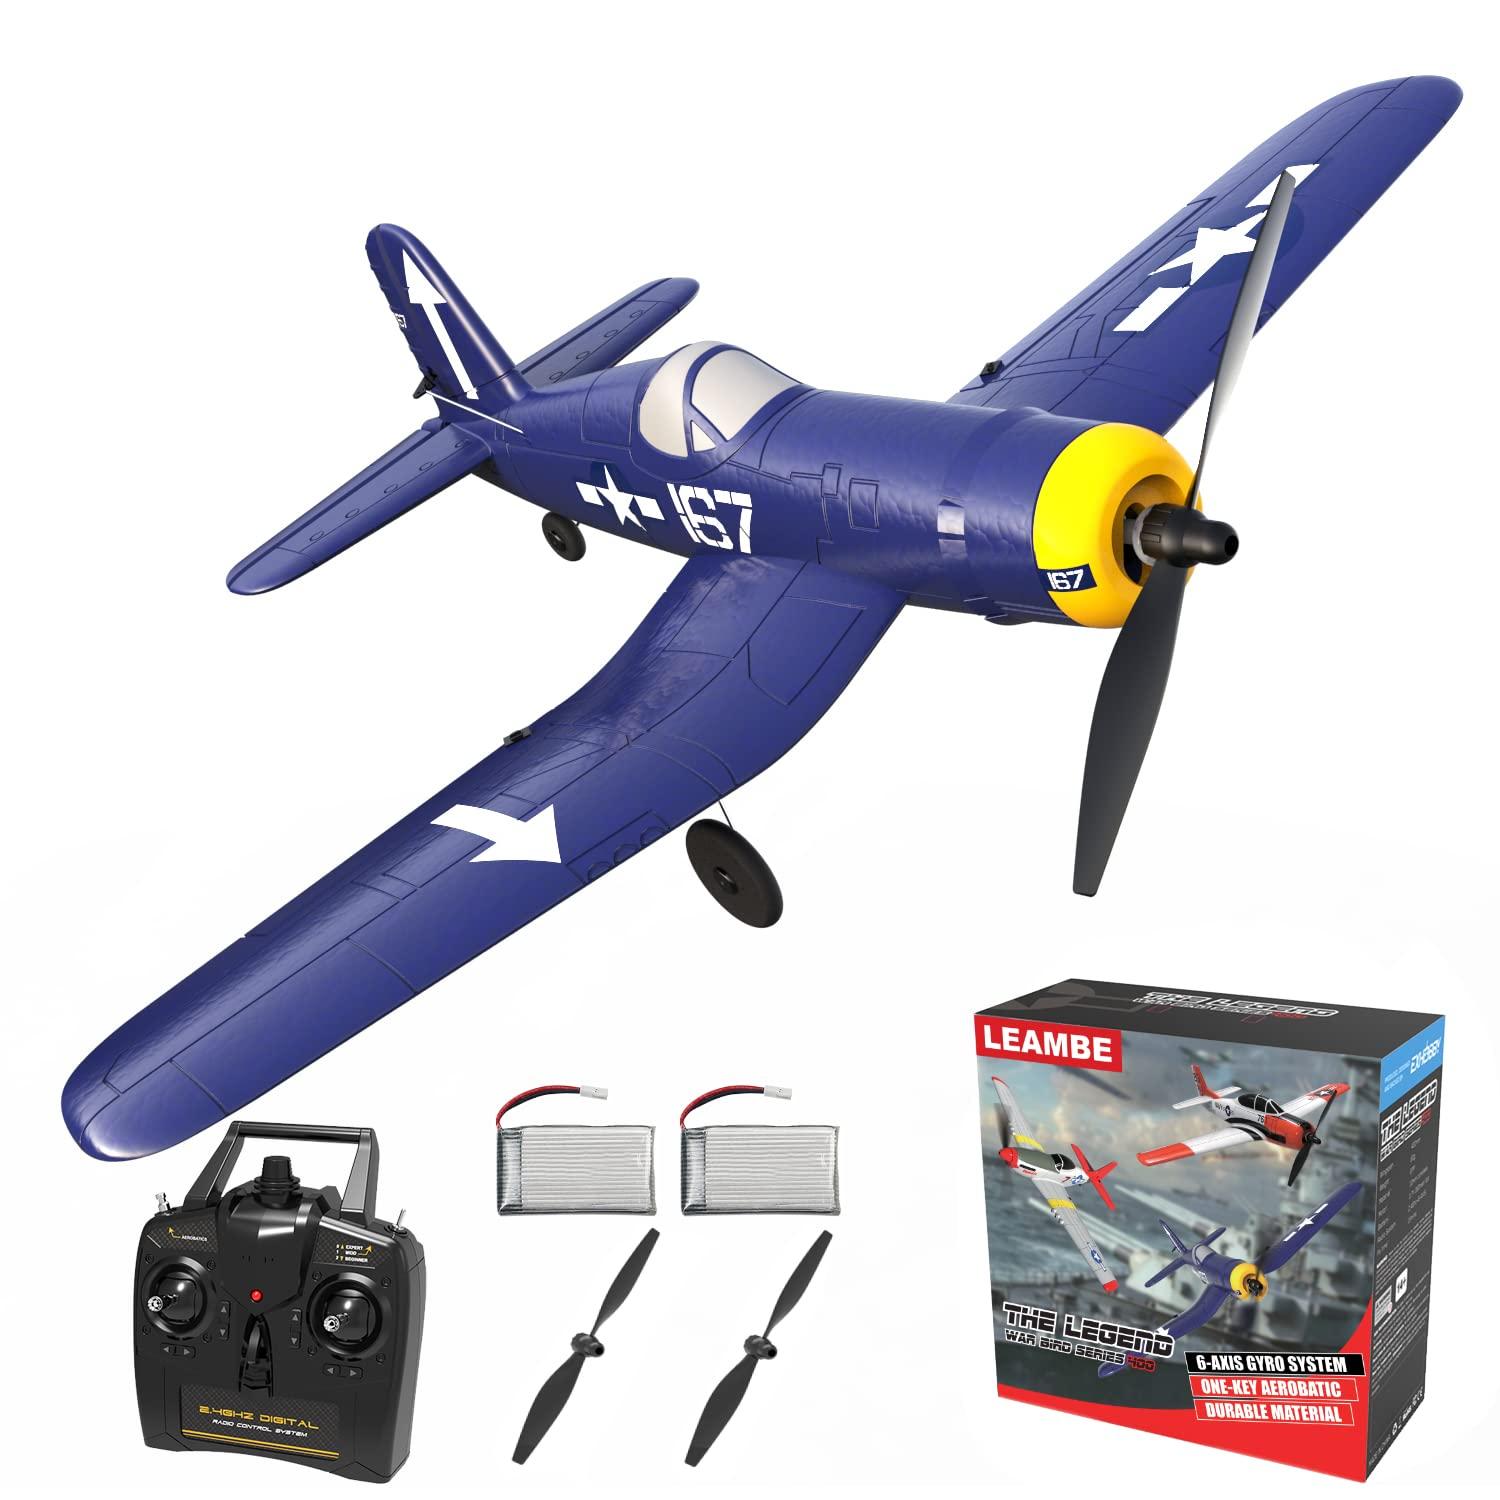 Remote Control Jet Amazon: Top Options for RC Jets on Amazon